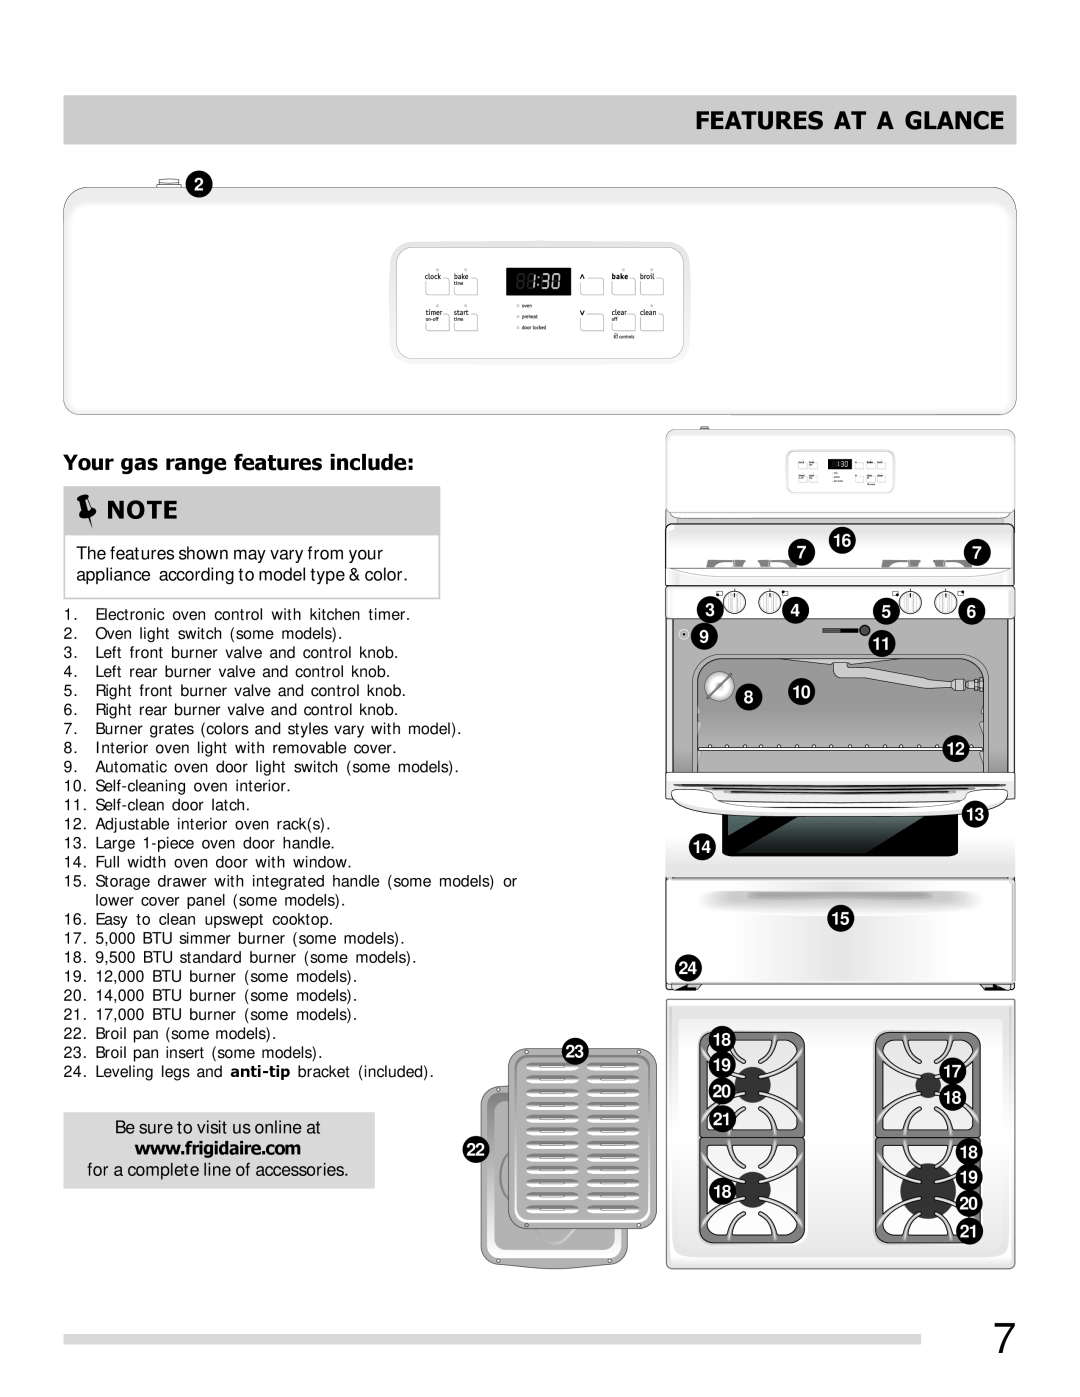 Frigidaire FFGF3027LW, 316901213, FFGF3027LB, FFGF3023LM, FFGF3023LW Features At A Glance, Your gas range features include 